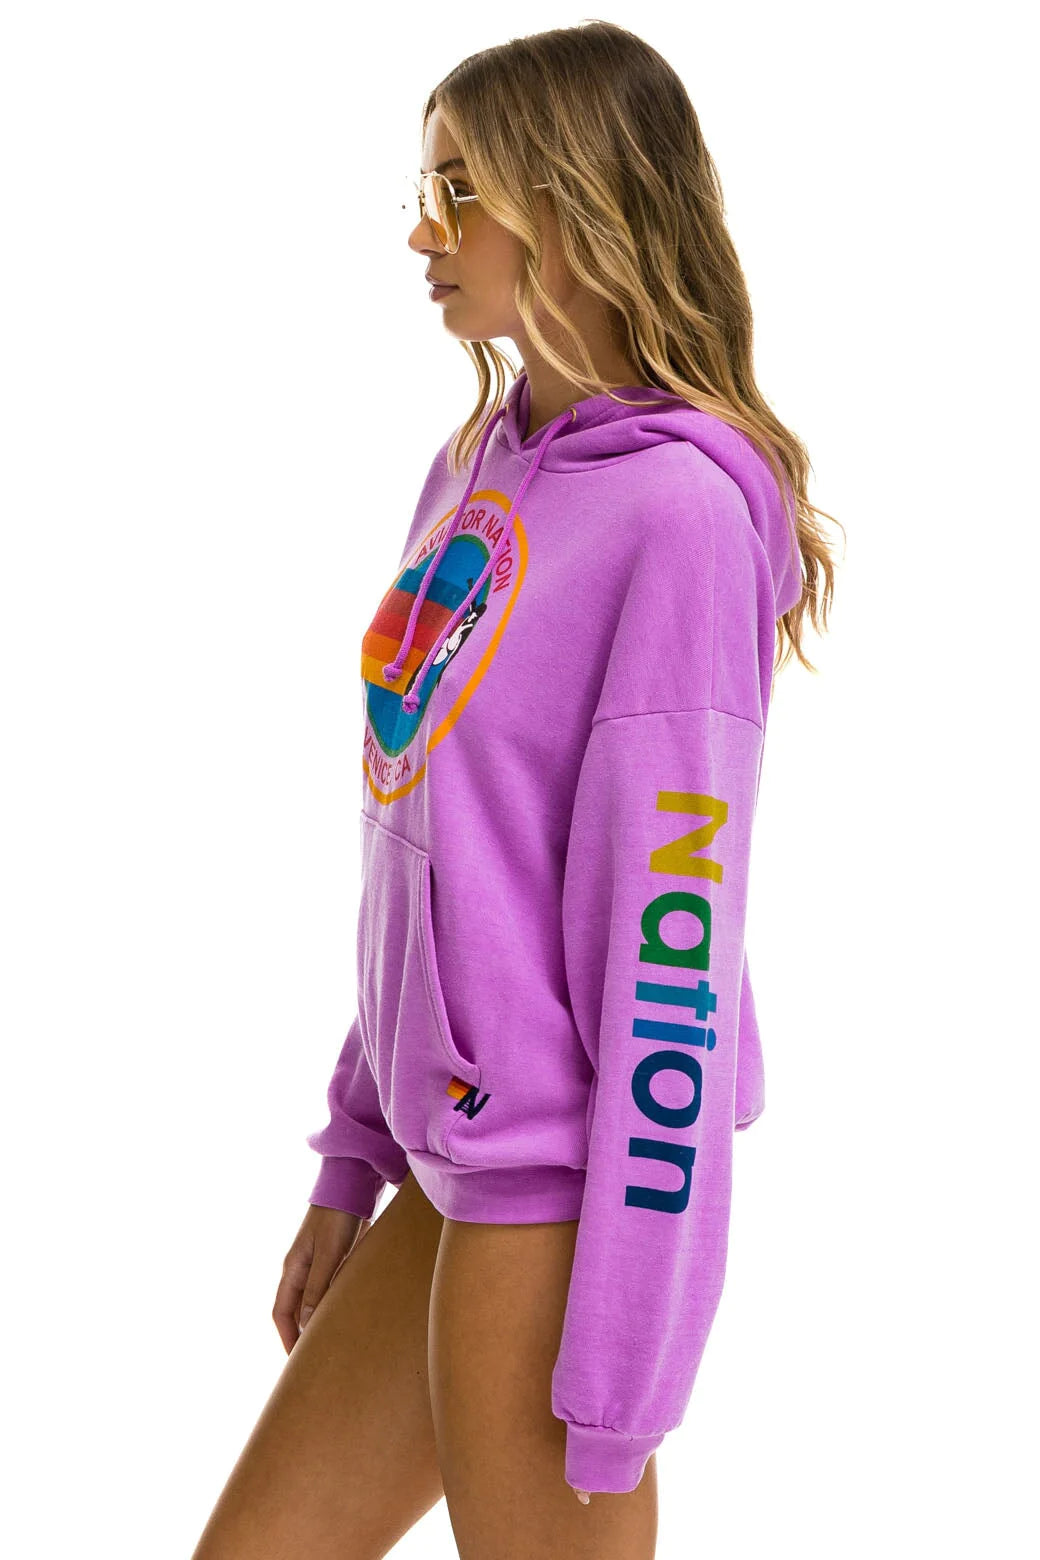 Aviator Nation Relaxed Pullover Hoodie - Neon Purple